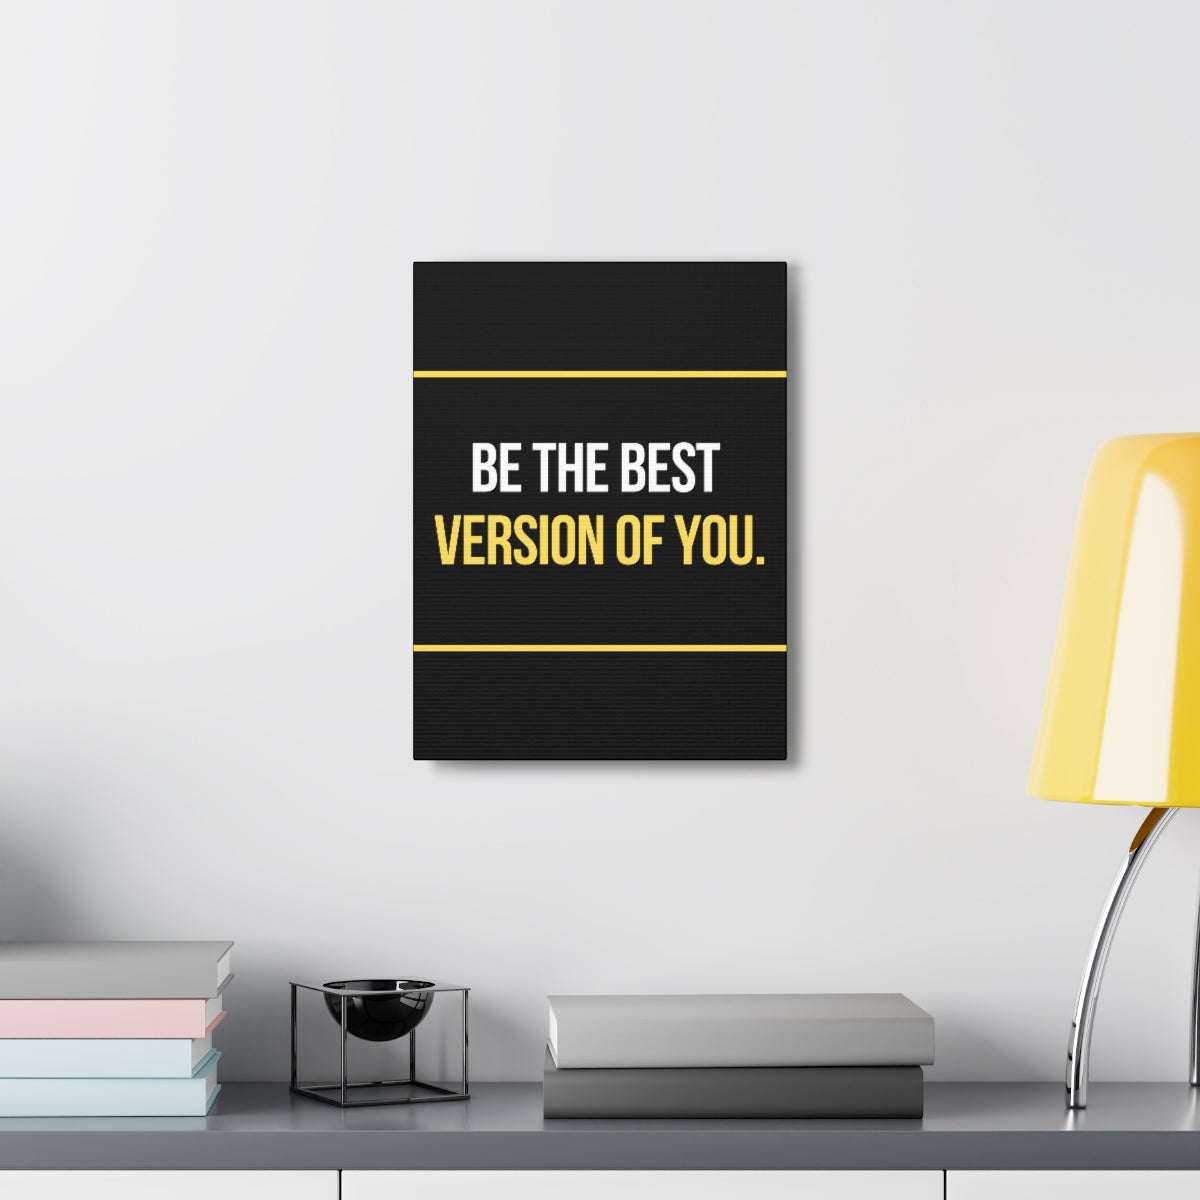 Scripture Walls Inspirational Wall Art Be The Best Version Of You Motivation Wall Decor for Home Office Gym Inspiring Success Quote Print Ready to Hang Unframed-Express Your Love Gifts